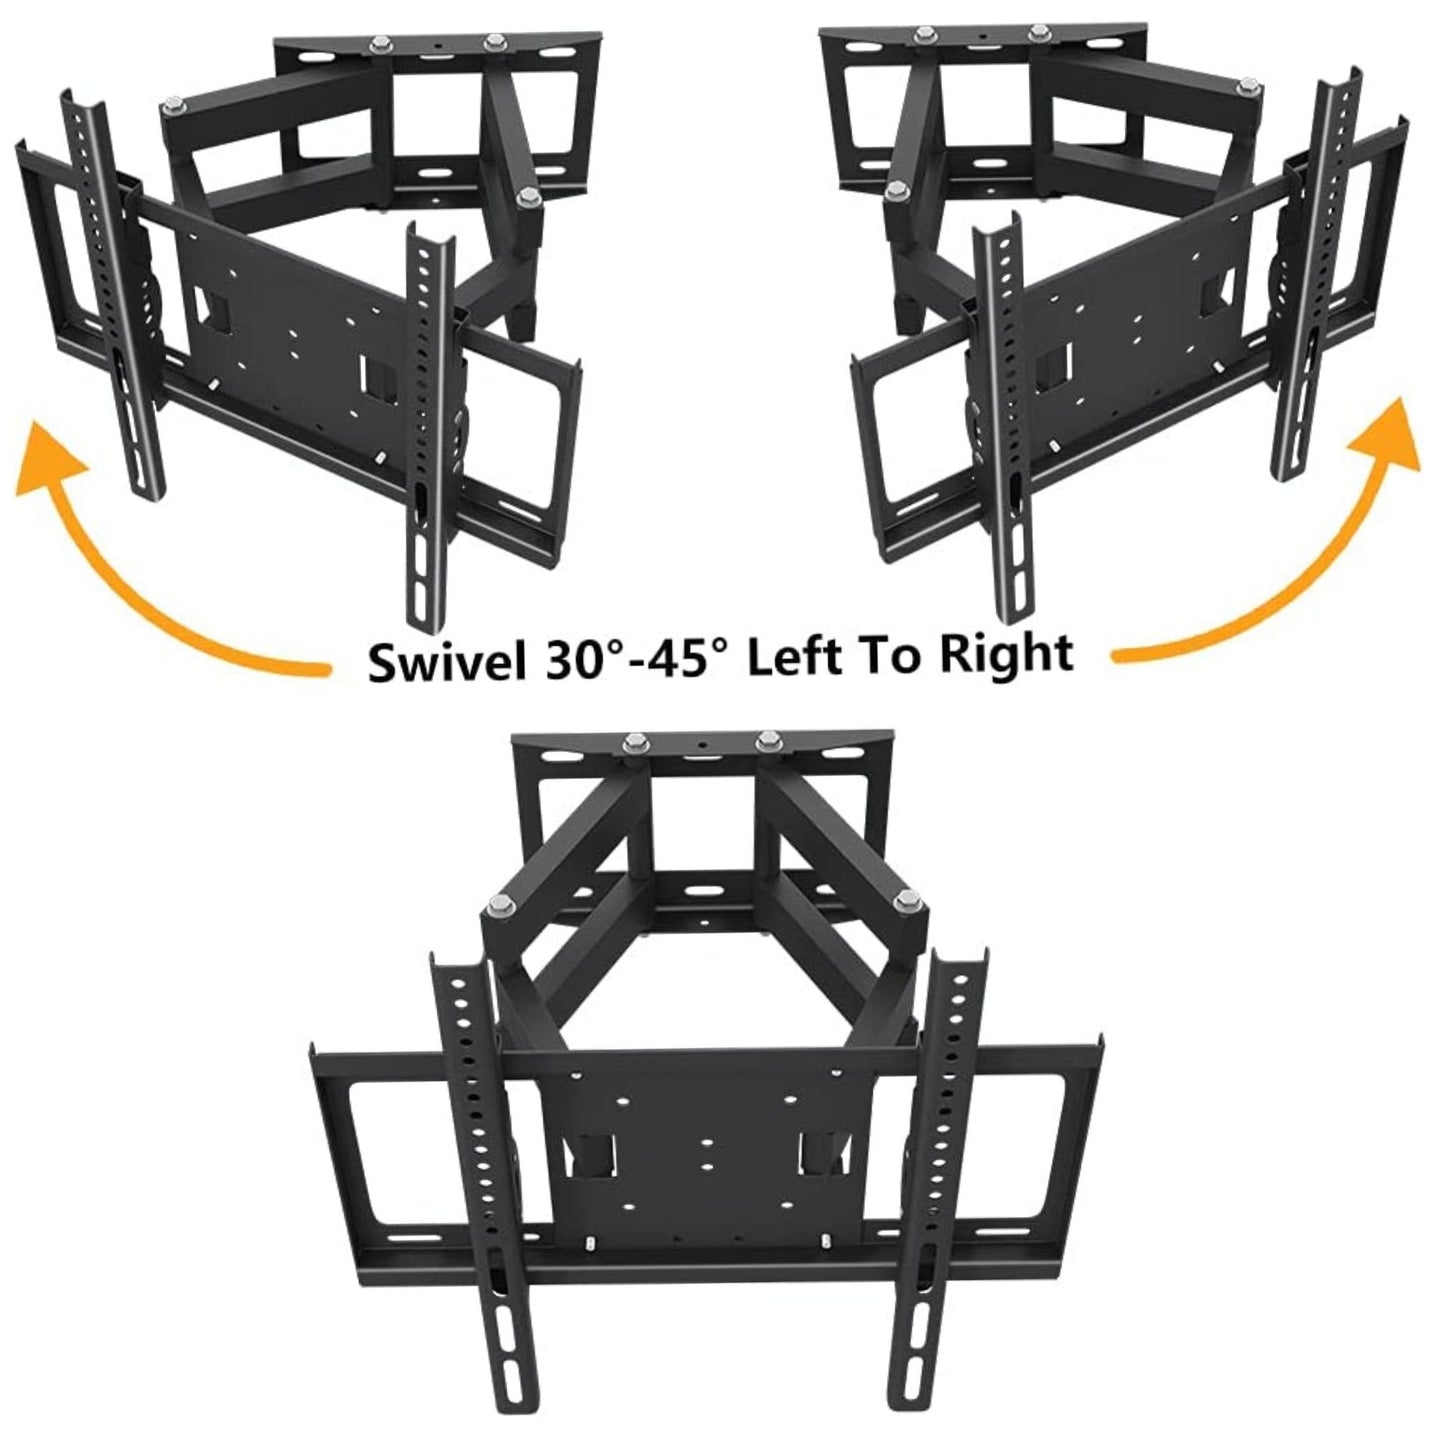 Star Gold Full Motion Movable TV Wall Bracket Mount for Most 32-75 Inches LED LCD Monitors and TV, SG-823MTB